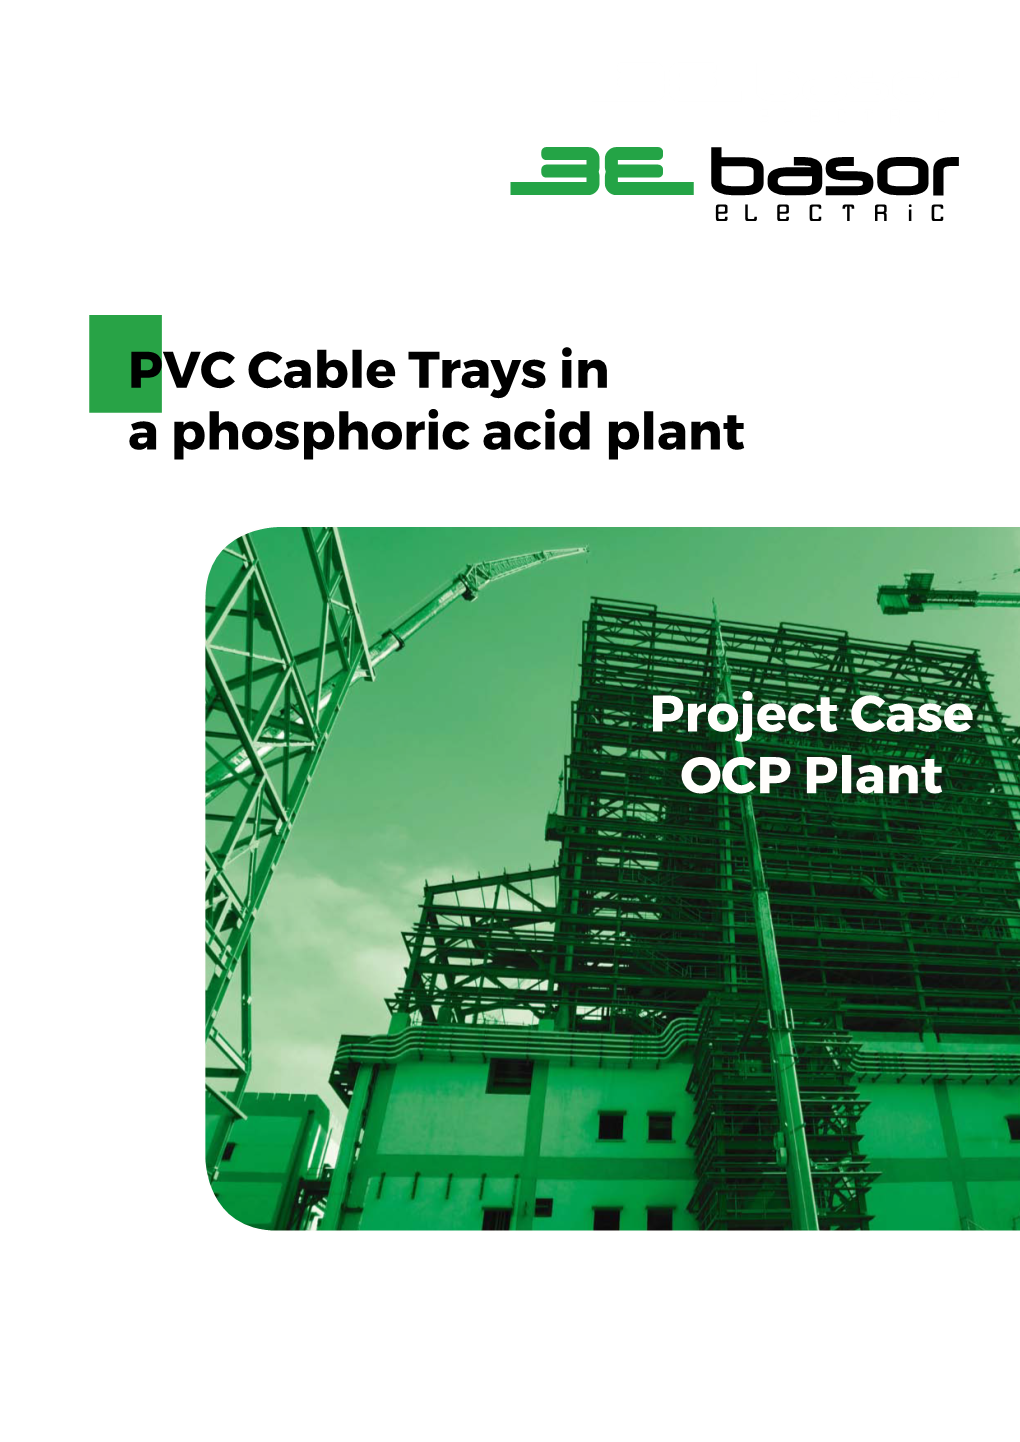 PVC Cable Trays in a Phosphoric Acid Plant Project Case OCP Plant